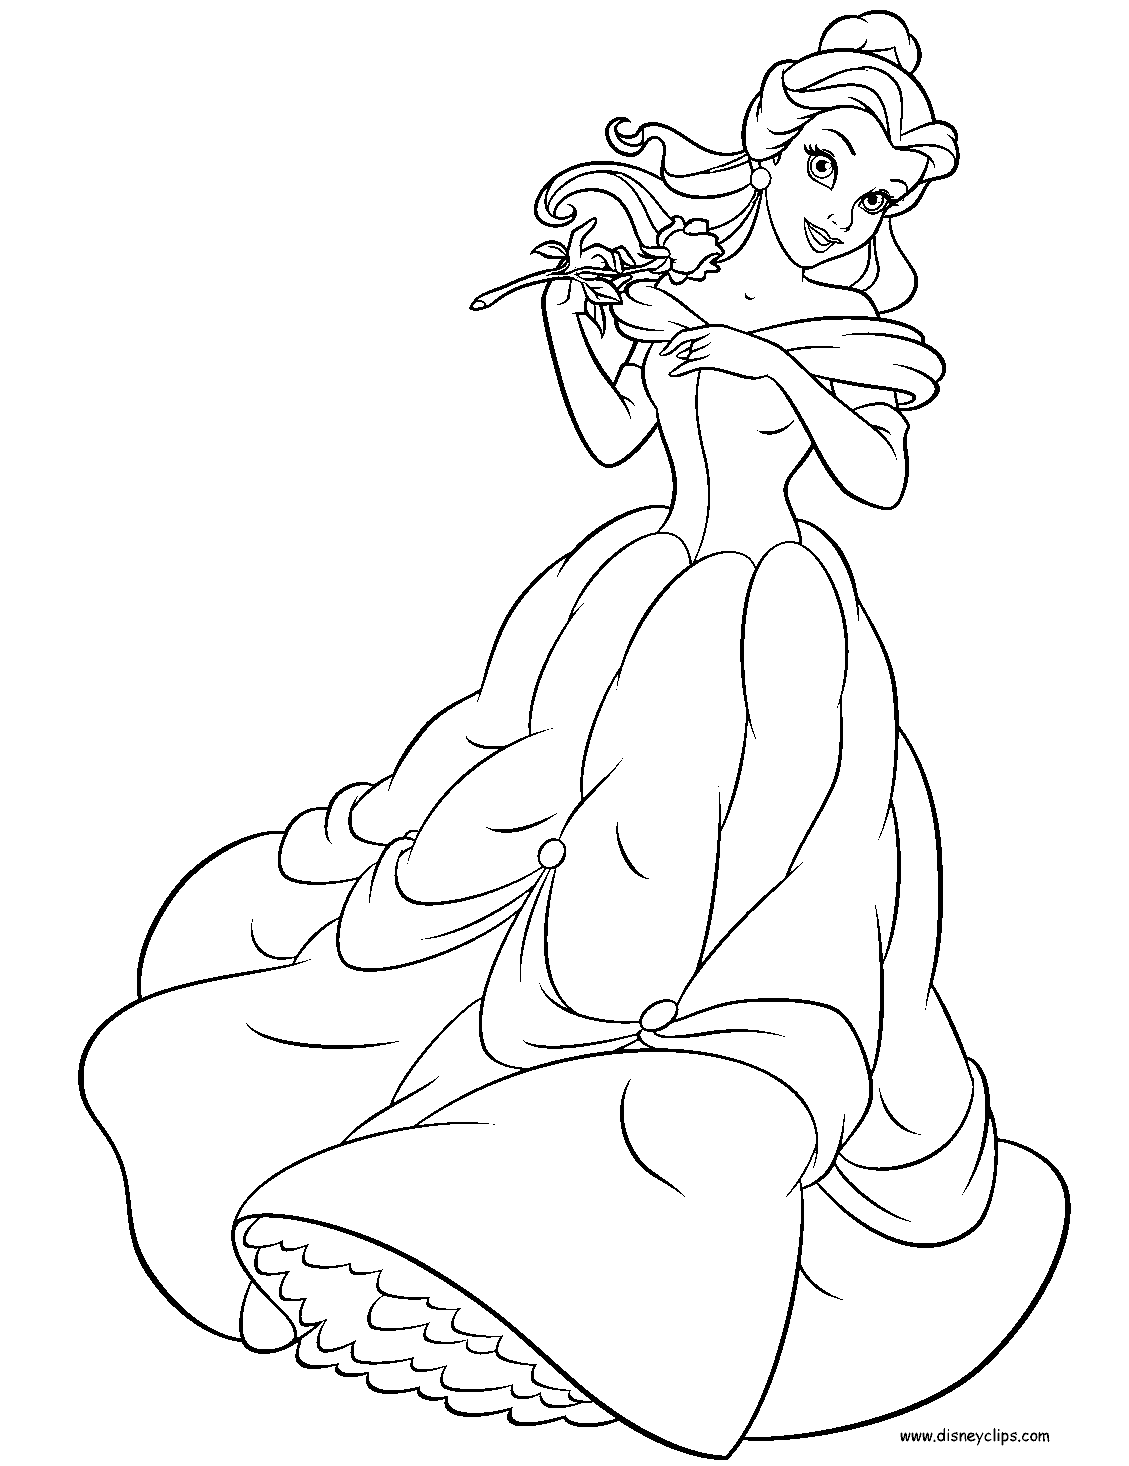 Belle coloring pages printable for free download